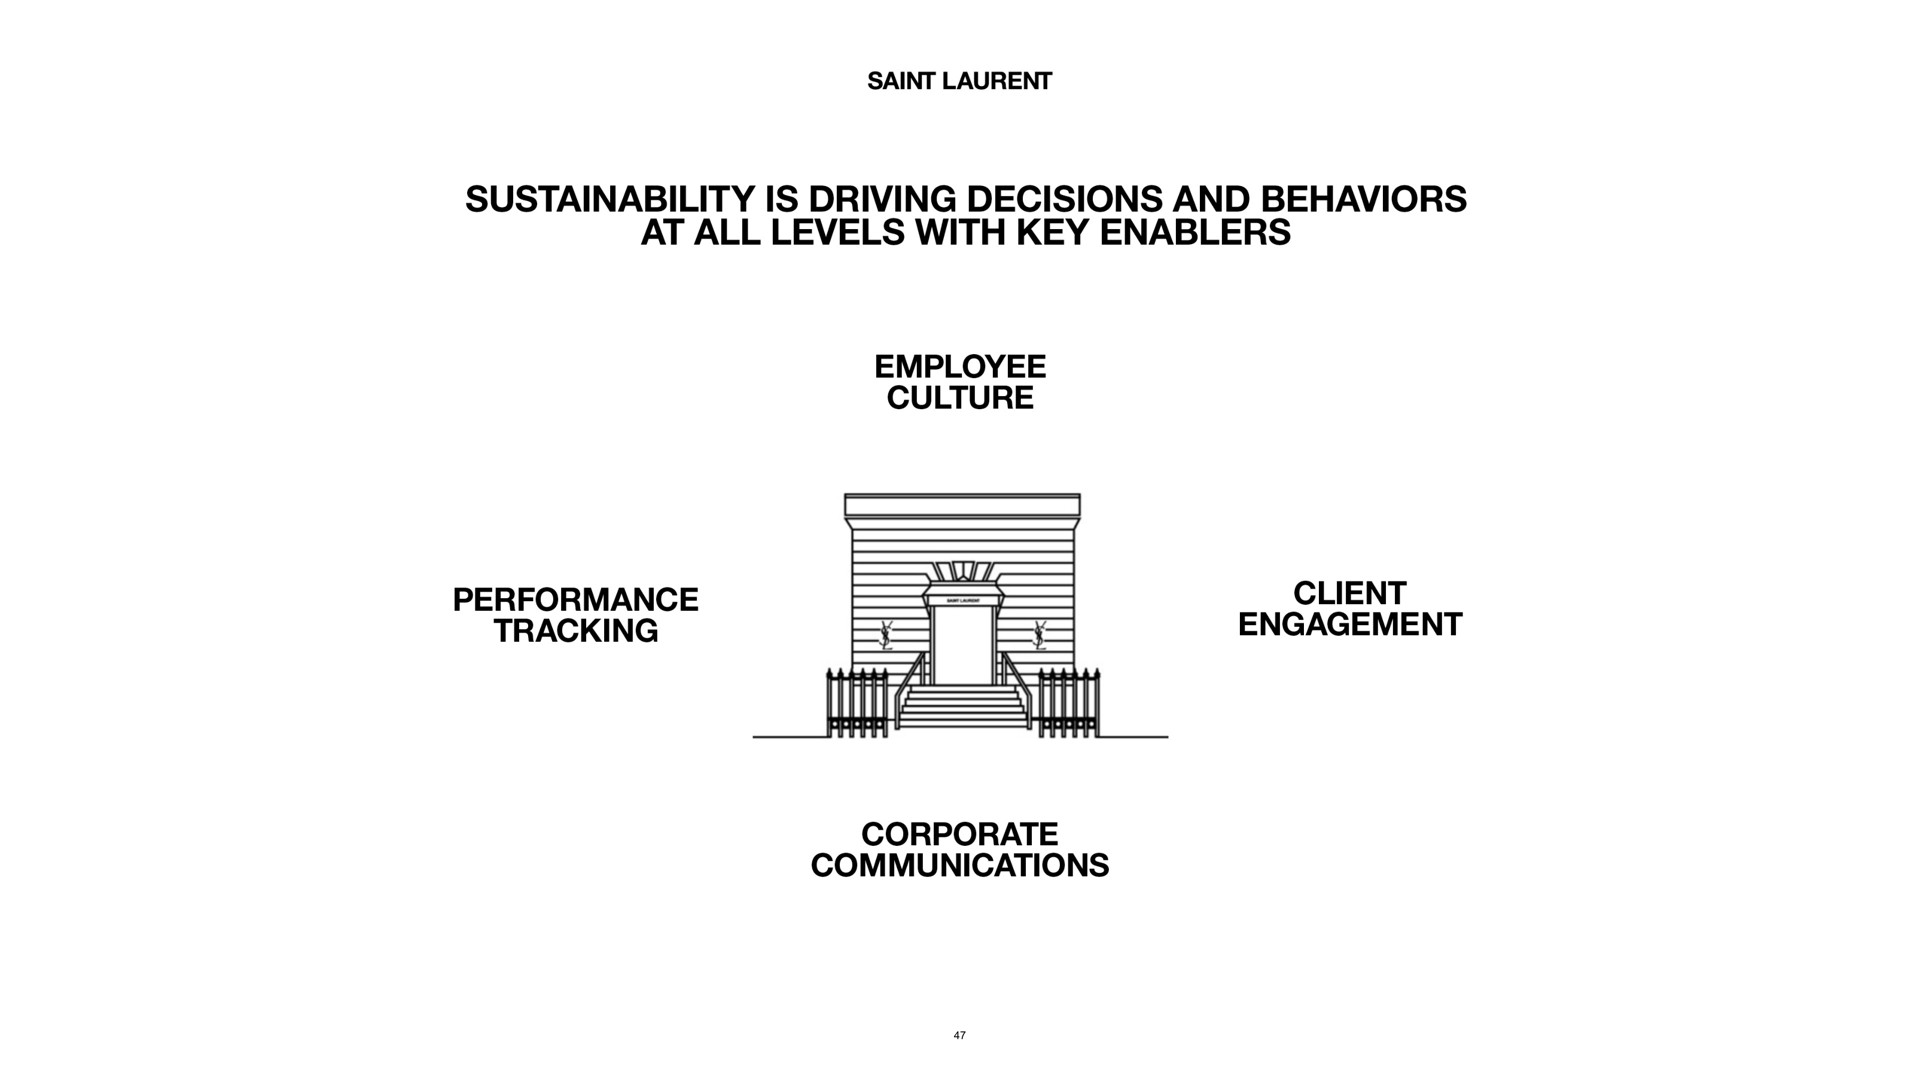 is driving decisions and behaviors at all levels with key performance tracking employee culture i corporate communications client engagement | Kering